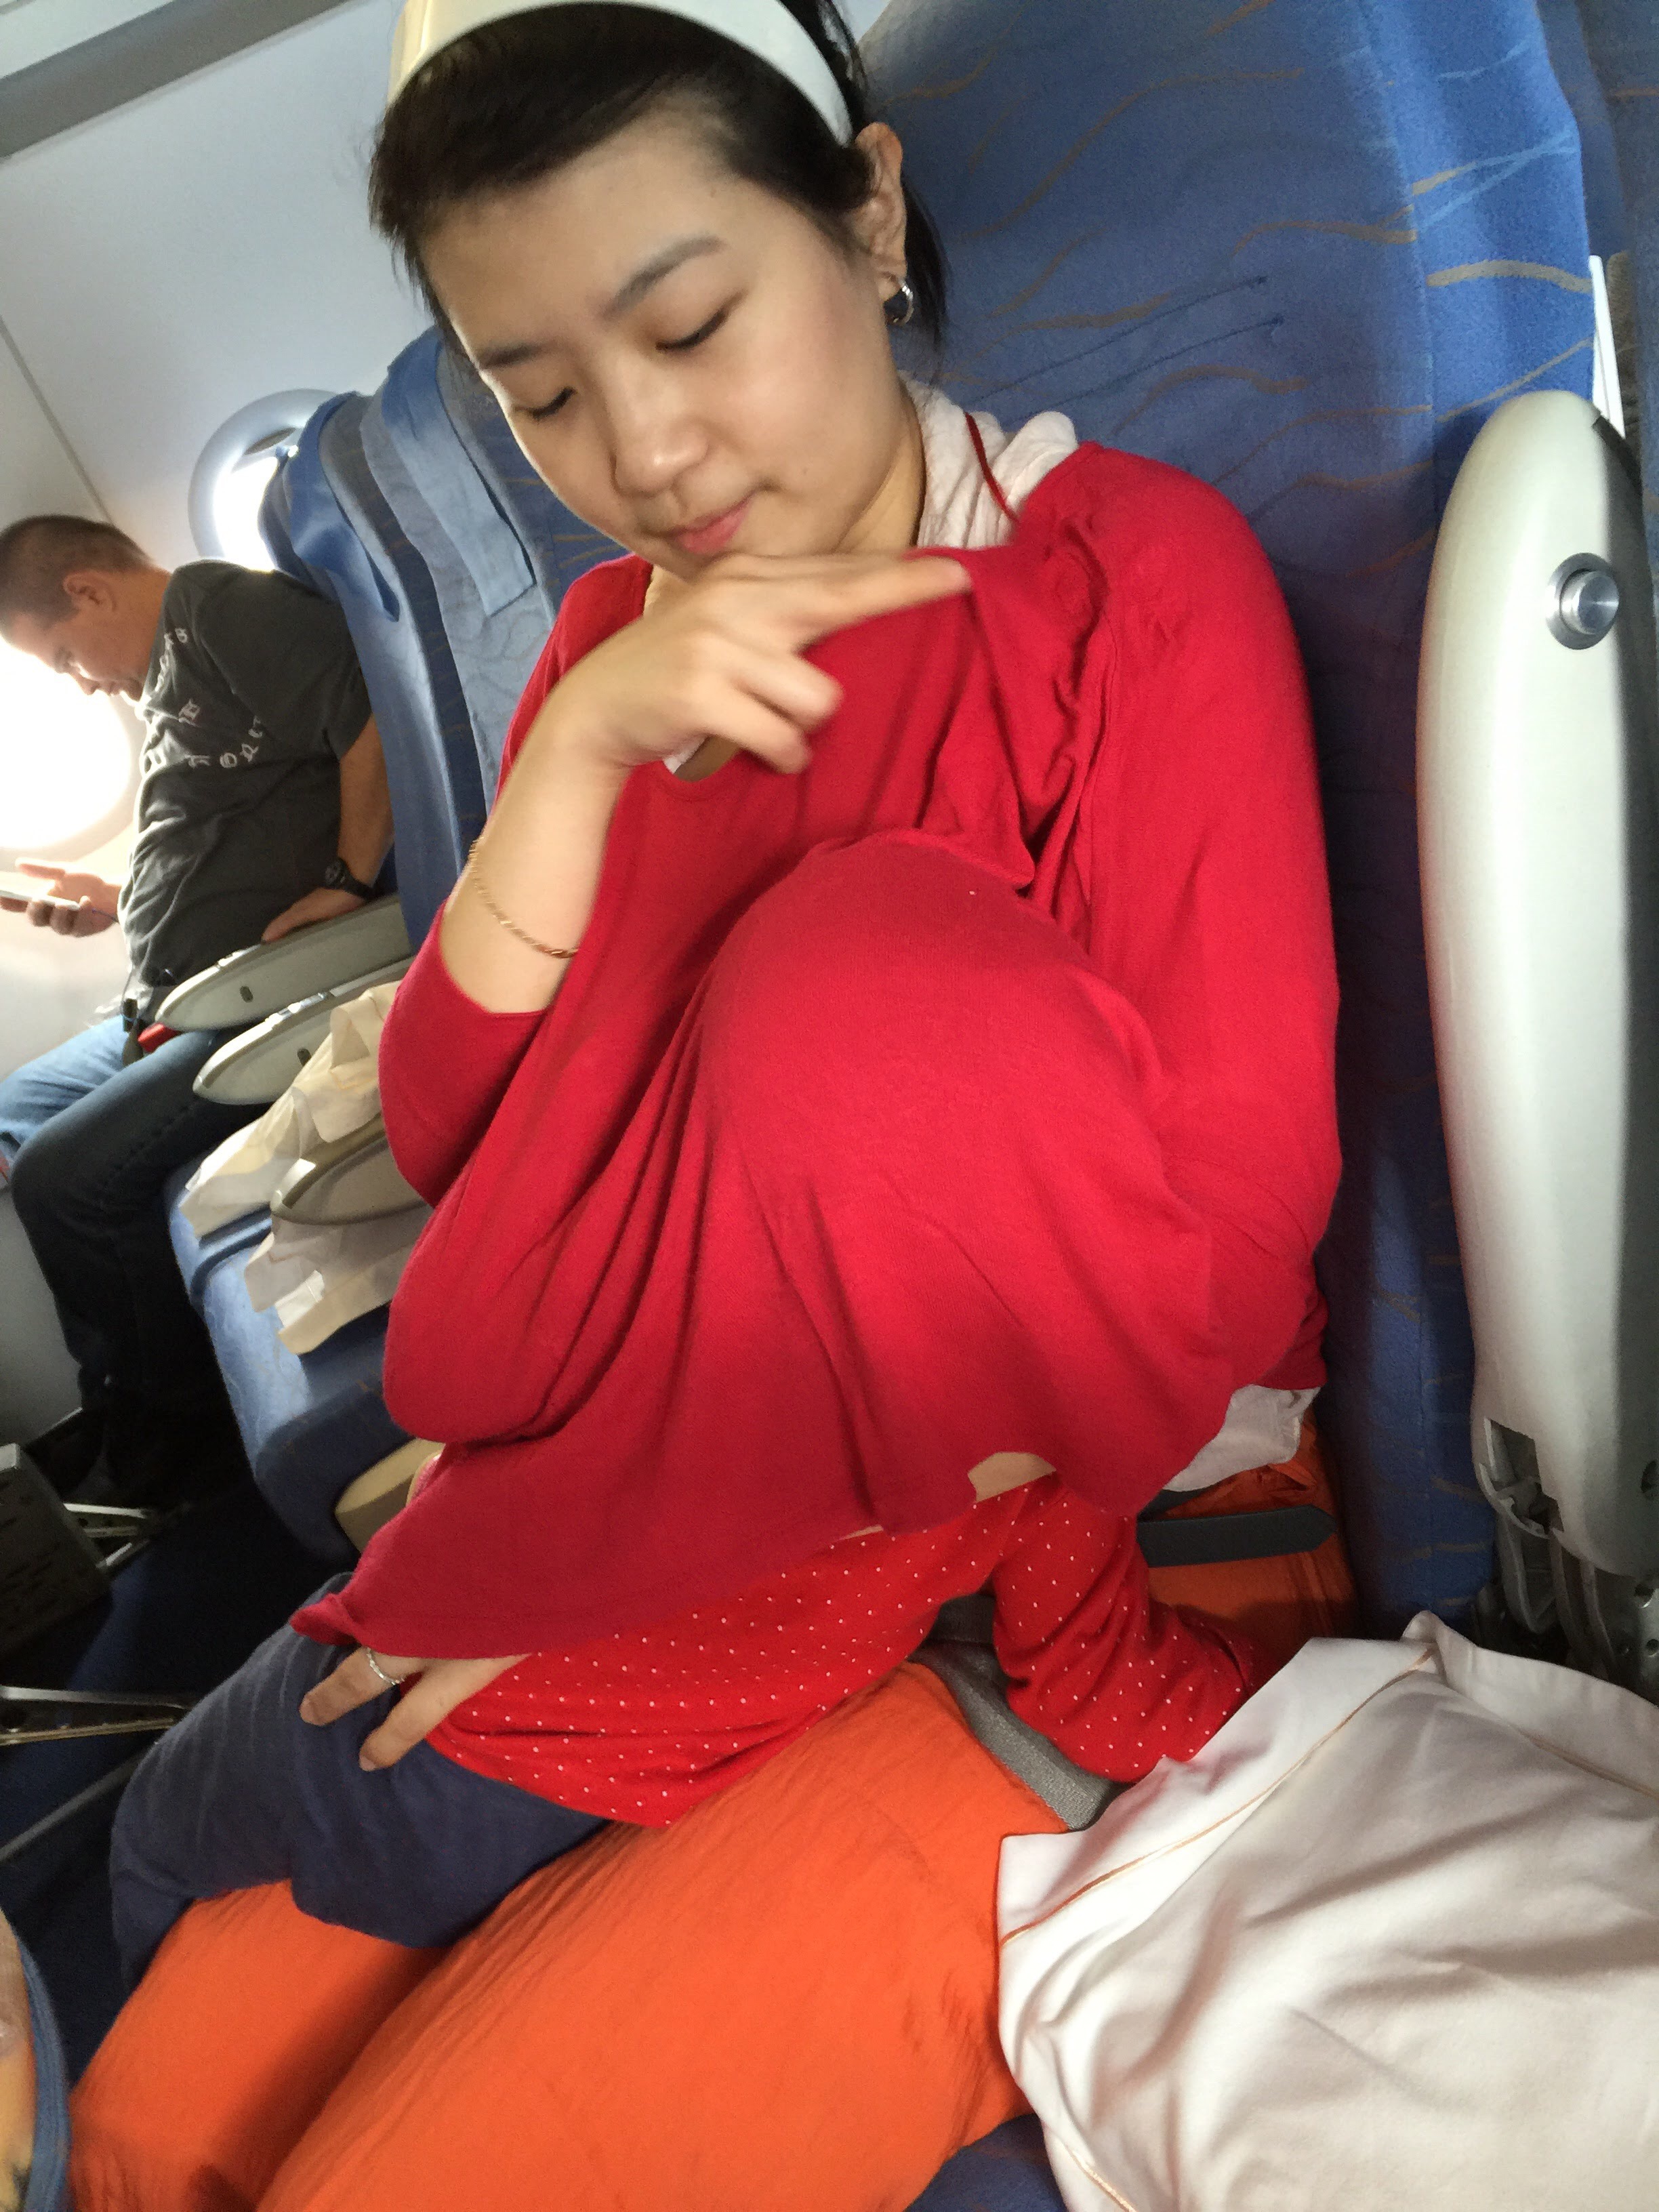 Breastfeeding in the airplane